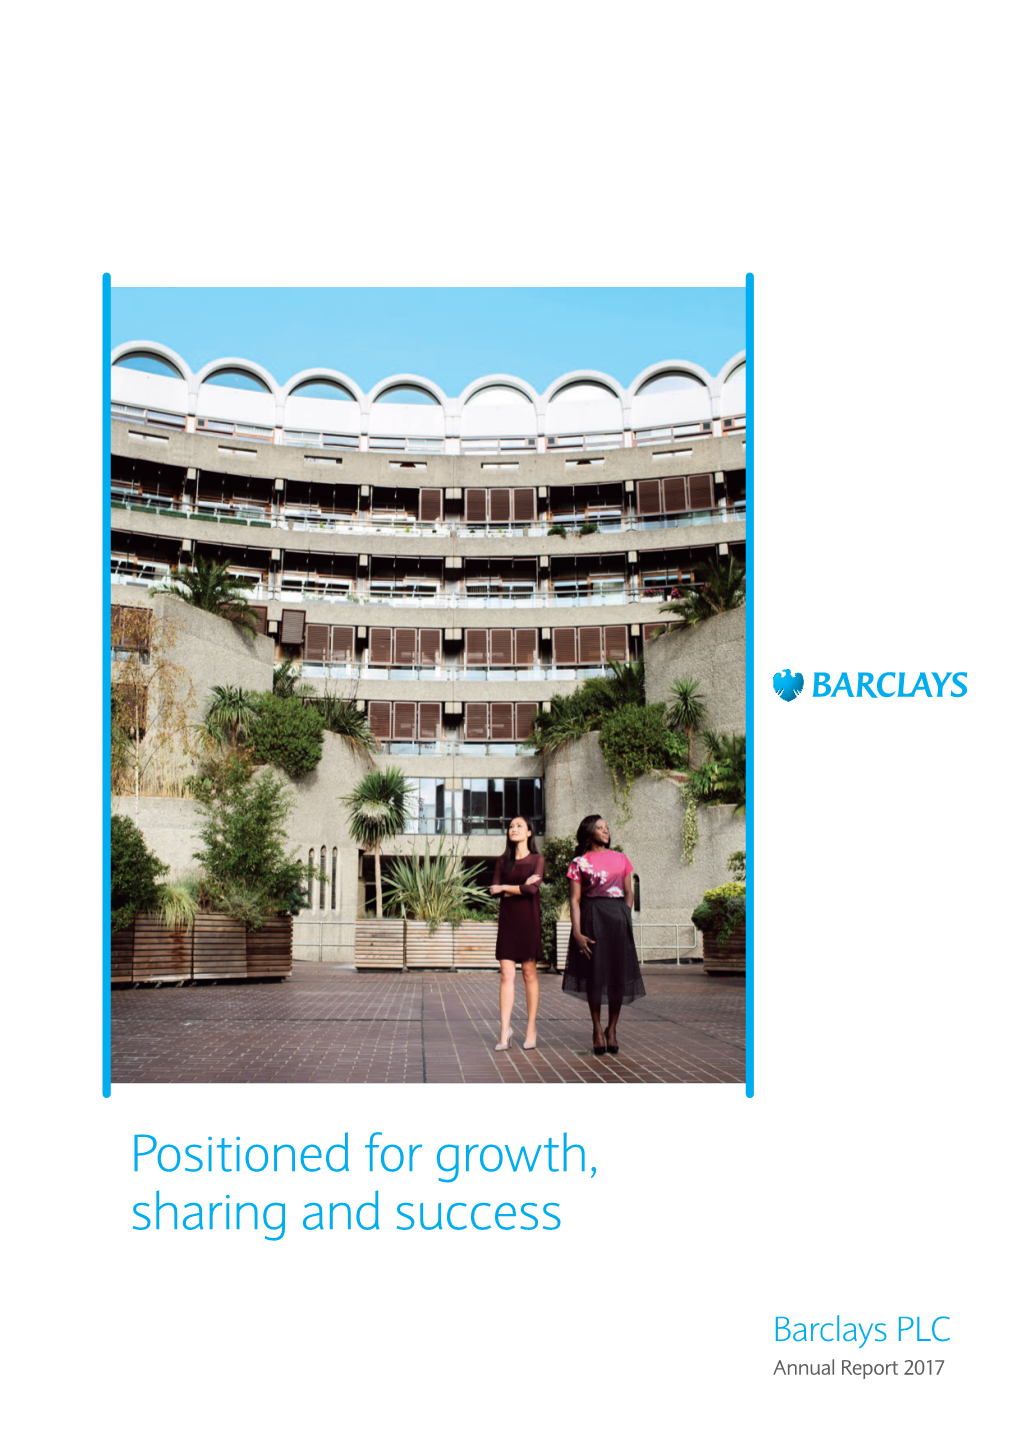 Barclays PLC Annual Report 2017